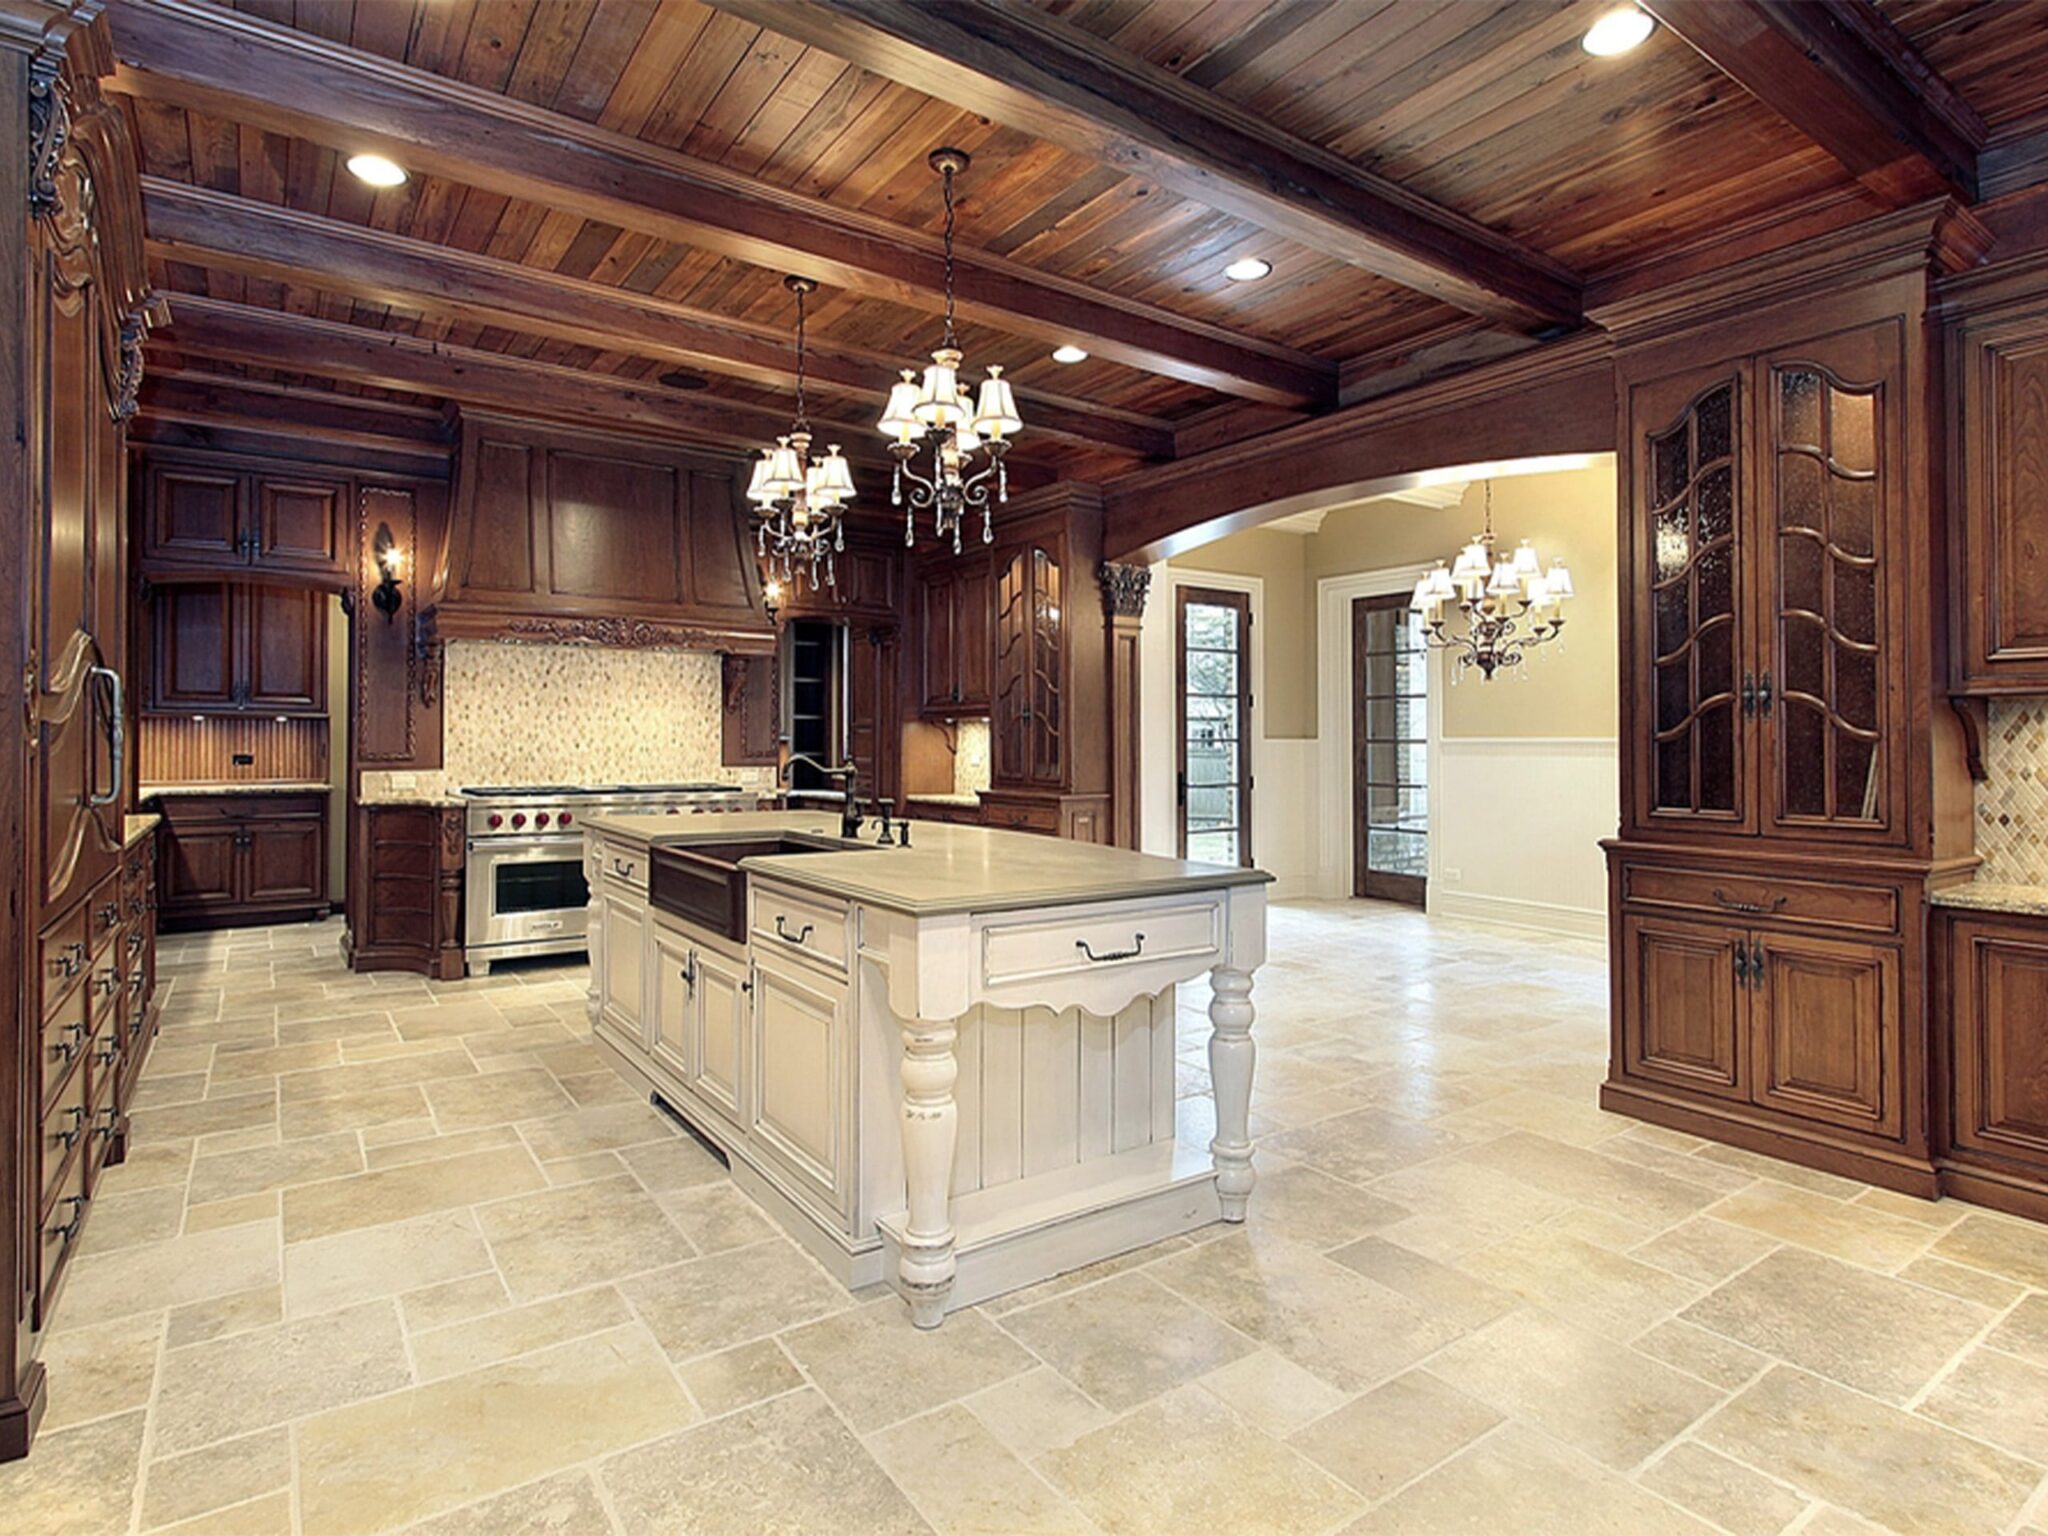 Spacious kitchen with rustic charm featuring rich dark wood cabinetry, a large central island with a light-colored countertop, terracotta tile flooring, and exposed wooden beams on the ceiling. Modern appliances are nestled within the cabinets, and elegant chandeliers provide lighting. An open doorway leads to an adjoining room with light walls and additional lighting fixtures